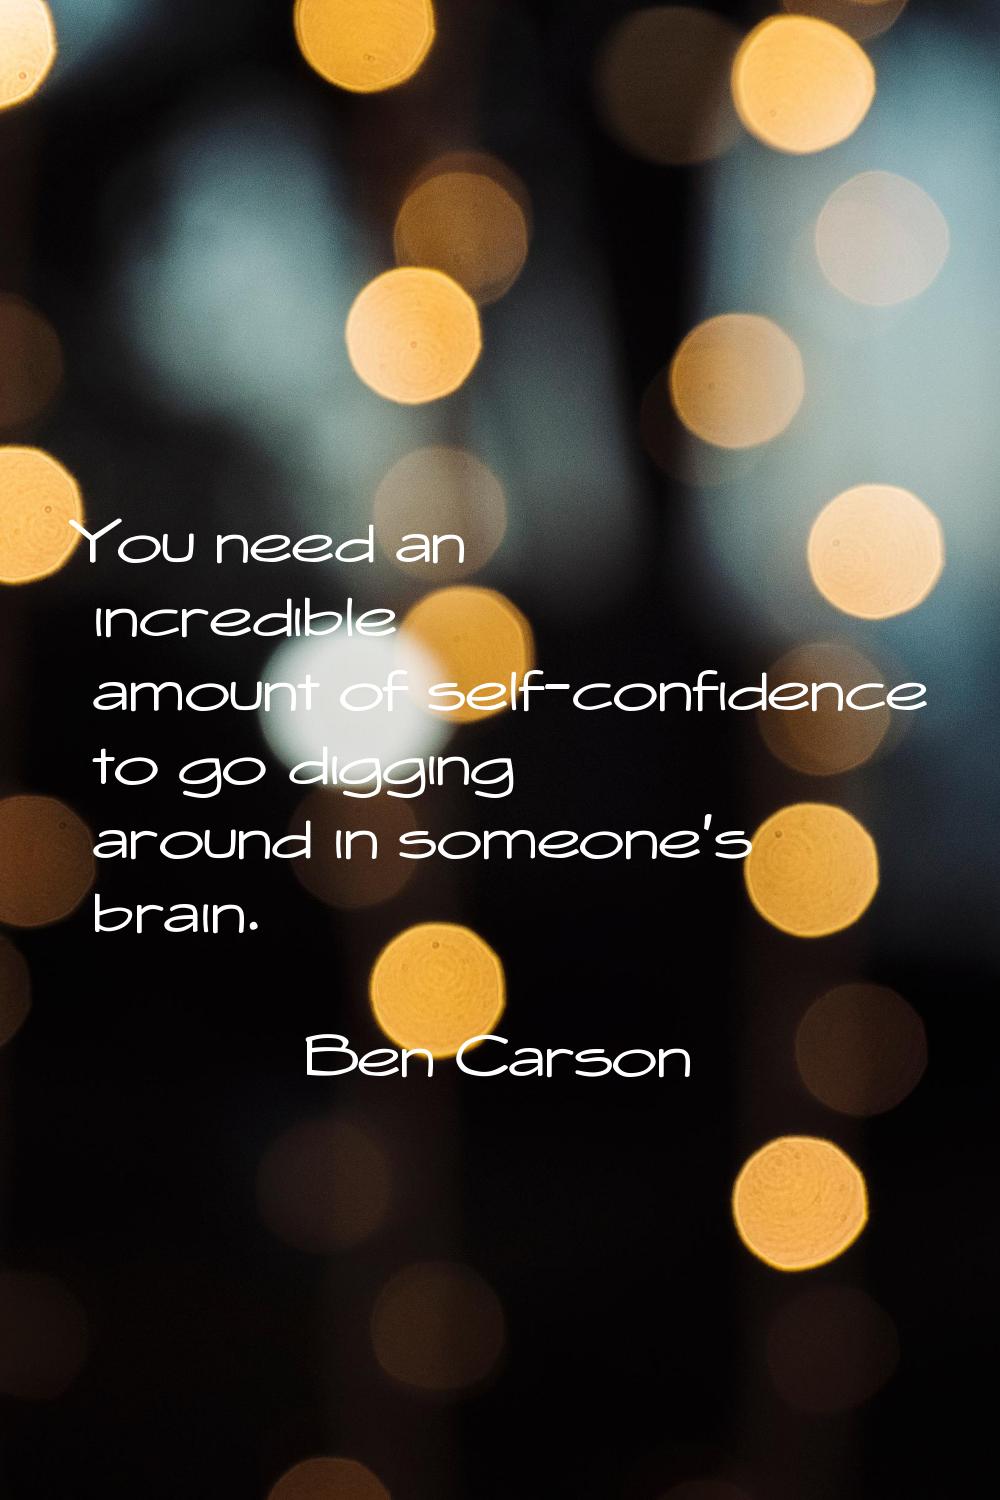 You need an incredible amount of self-confidence to go digging around in someone's brain.